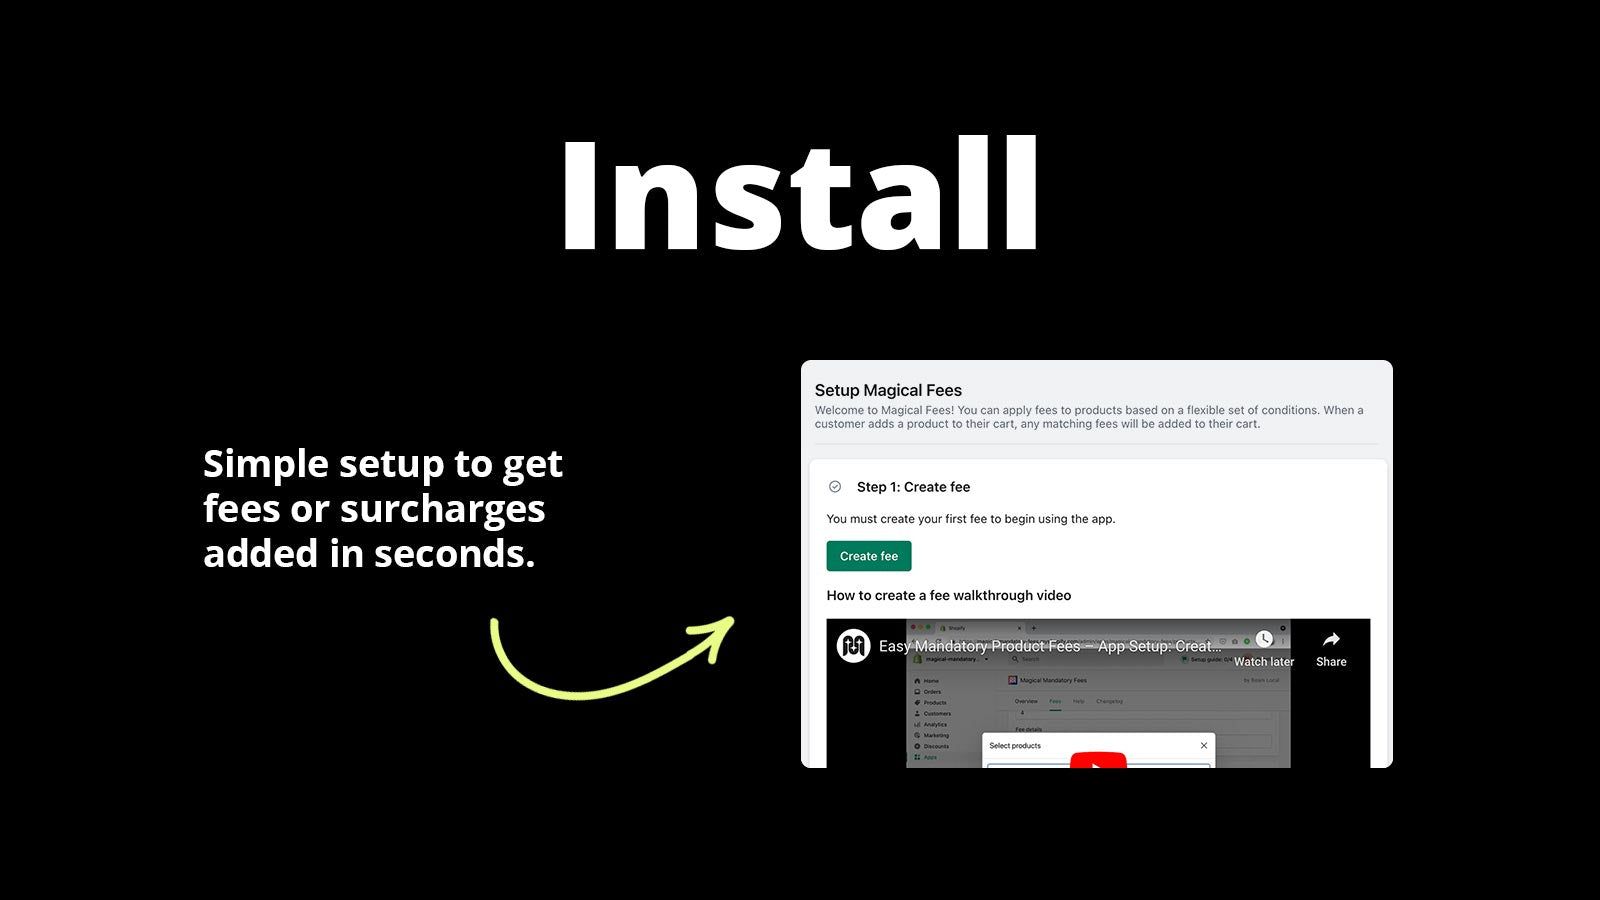 Install - Simple setup to get fees added in seconds